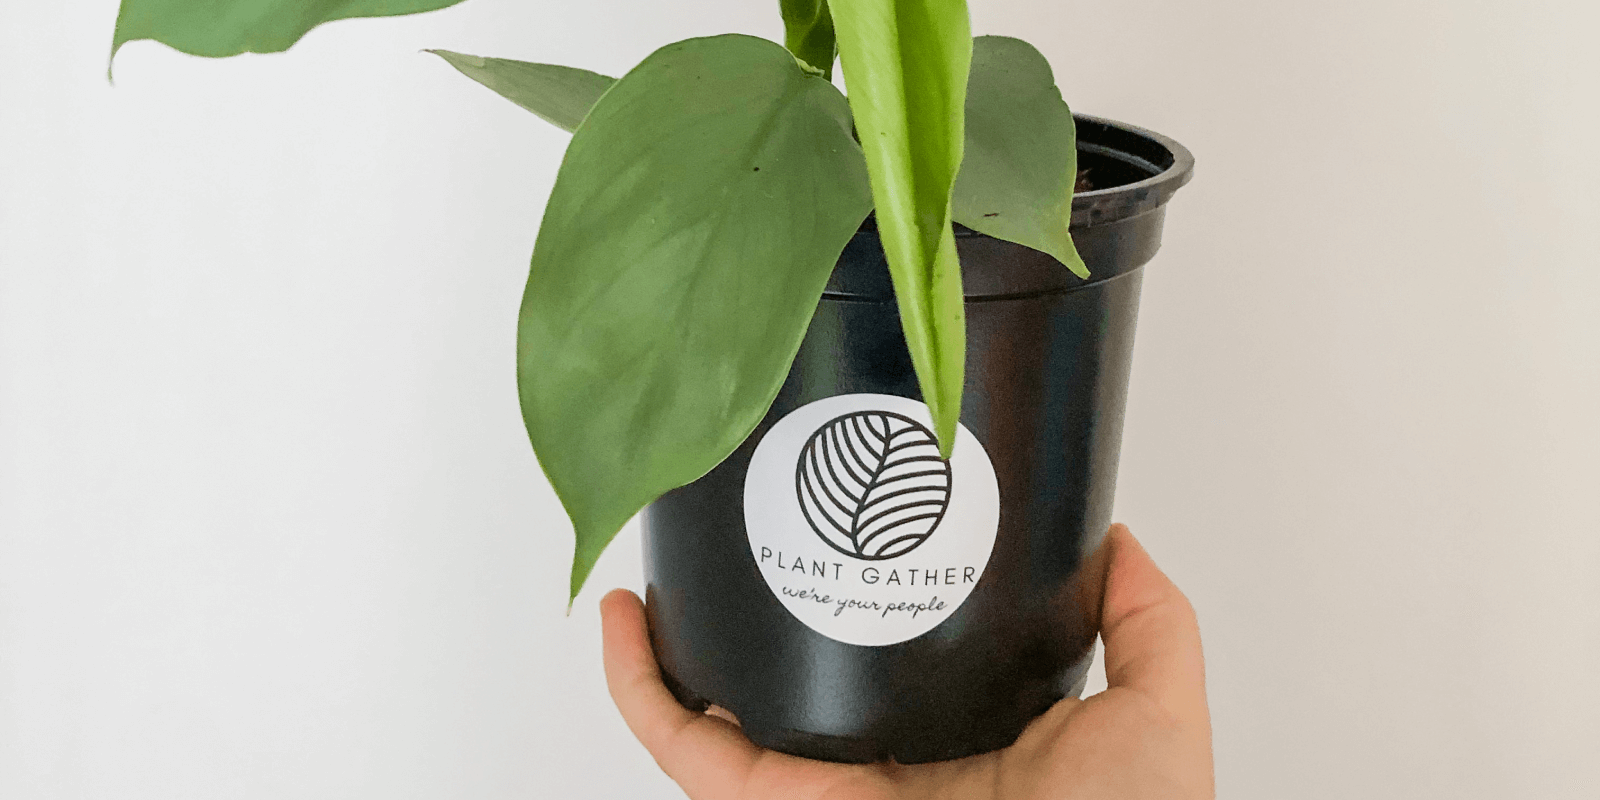 A person holds a small plant in a pot with “Plant Gather we’re your people” printed on the pot.